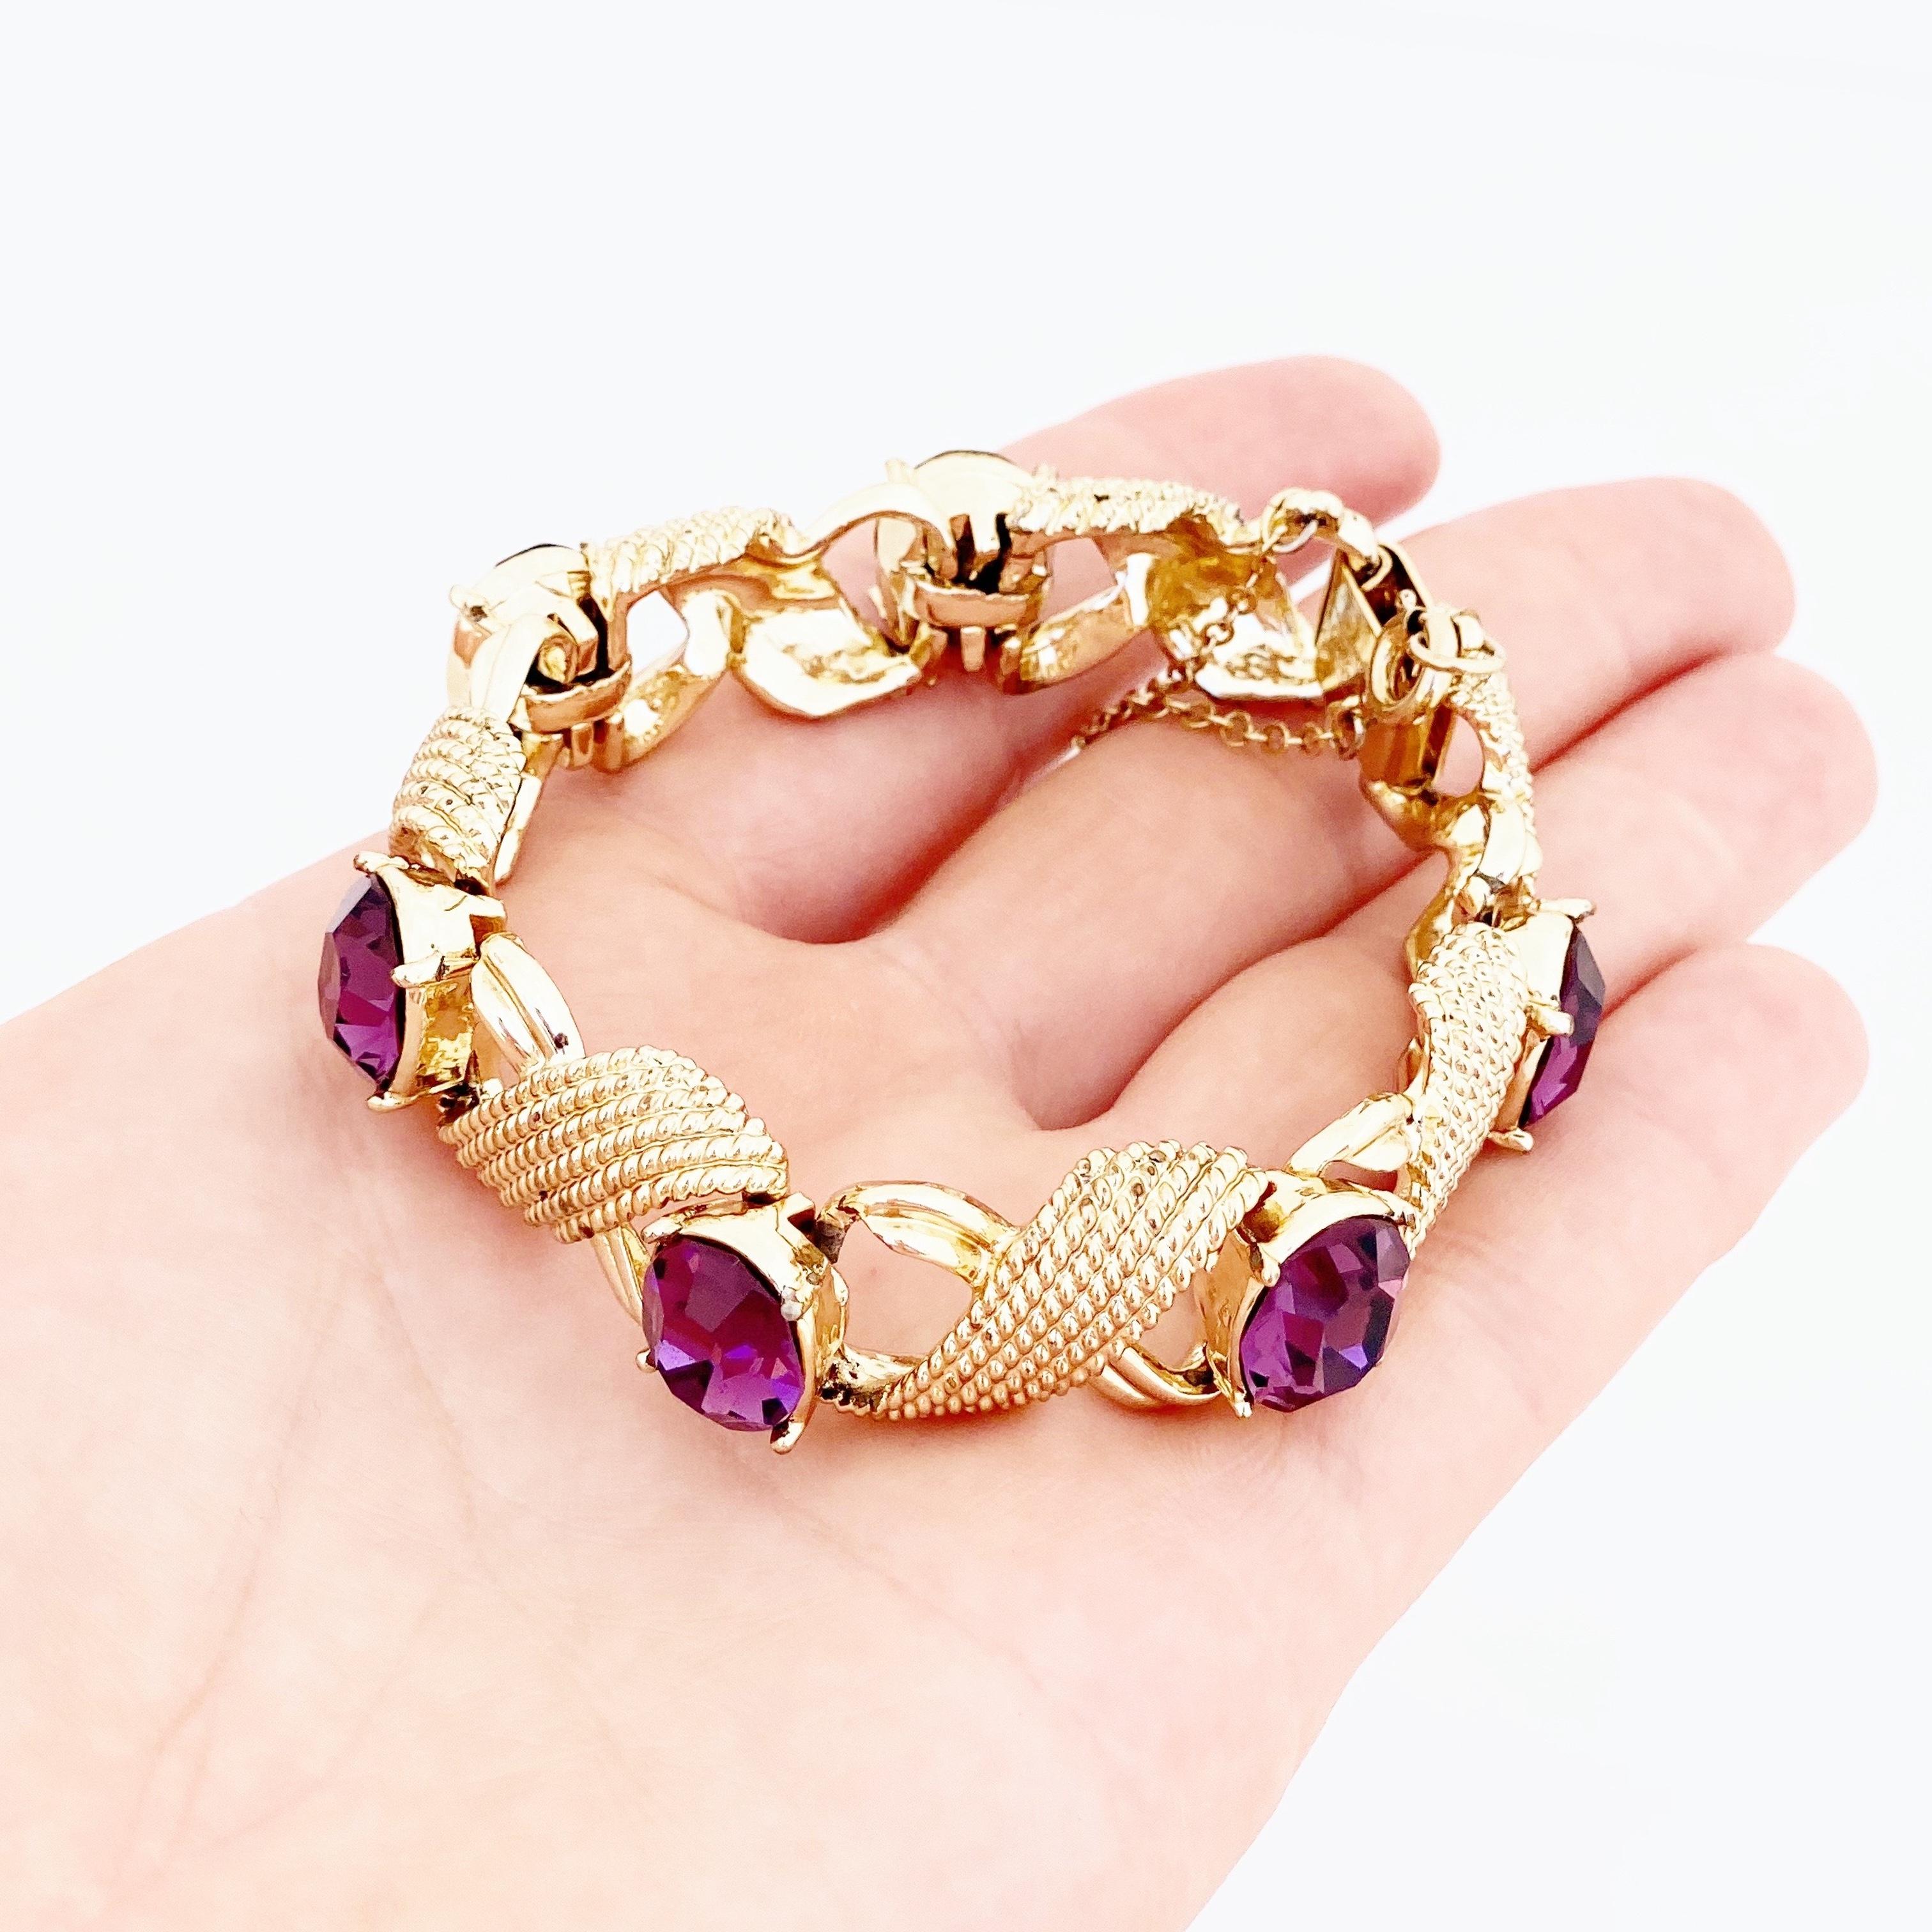 Gold Bracelet With Purple Crystals By Corocraft, 1950s 6